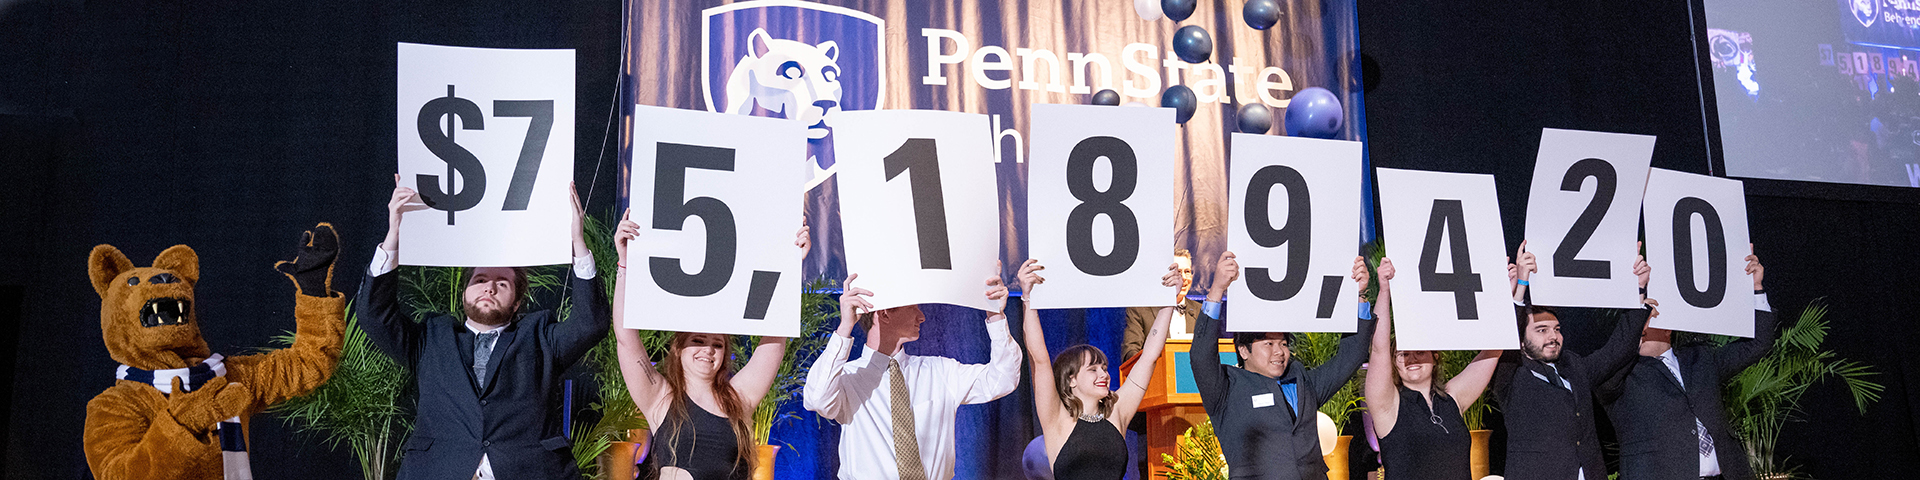 The Nittany Lion presents students holding number signs reading $75,189,420, Penn State Behrend's campaign fundraising total, at the college's Glenhill Appreciation Dinner in 2022.